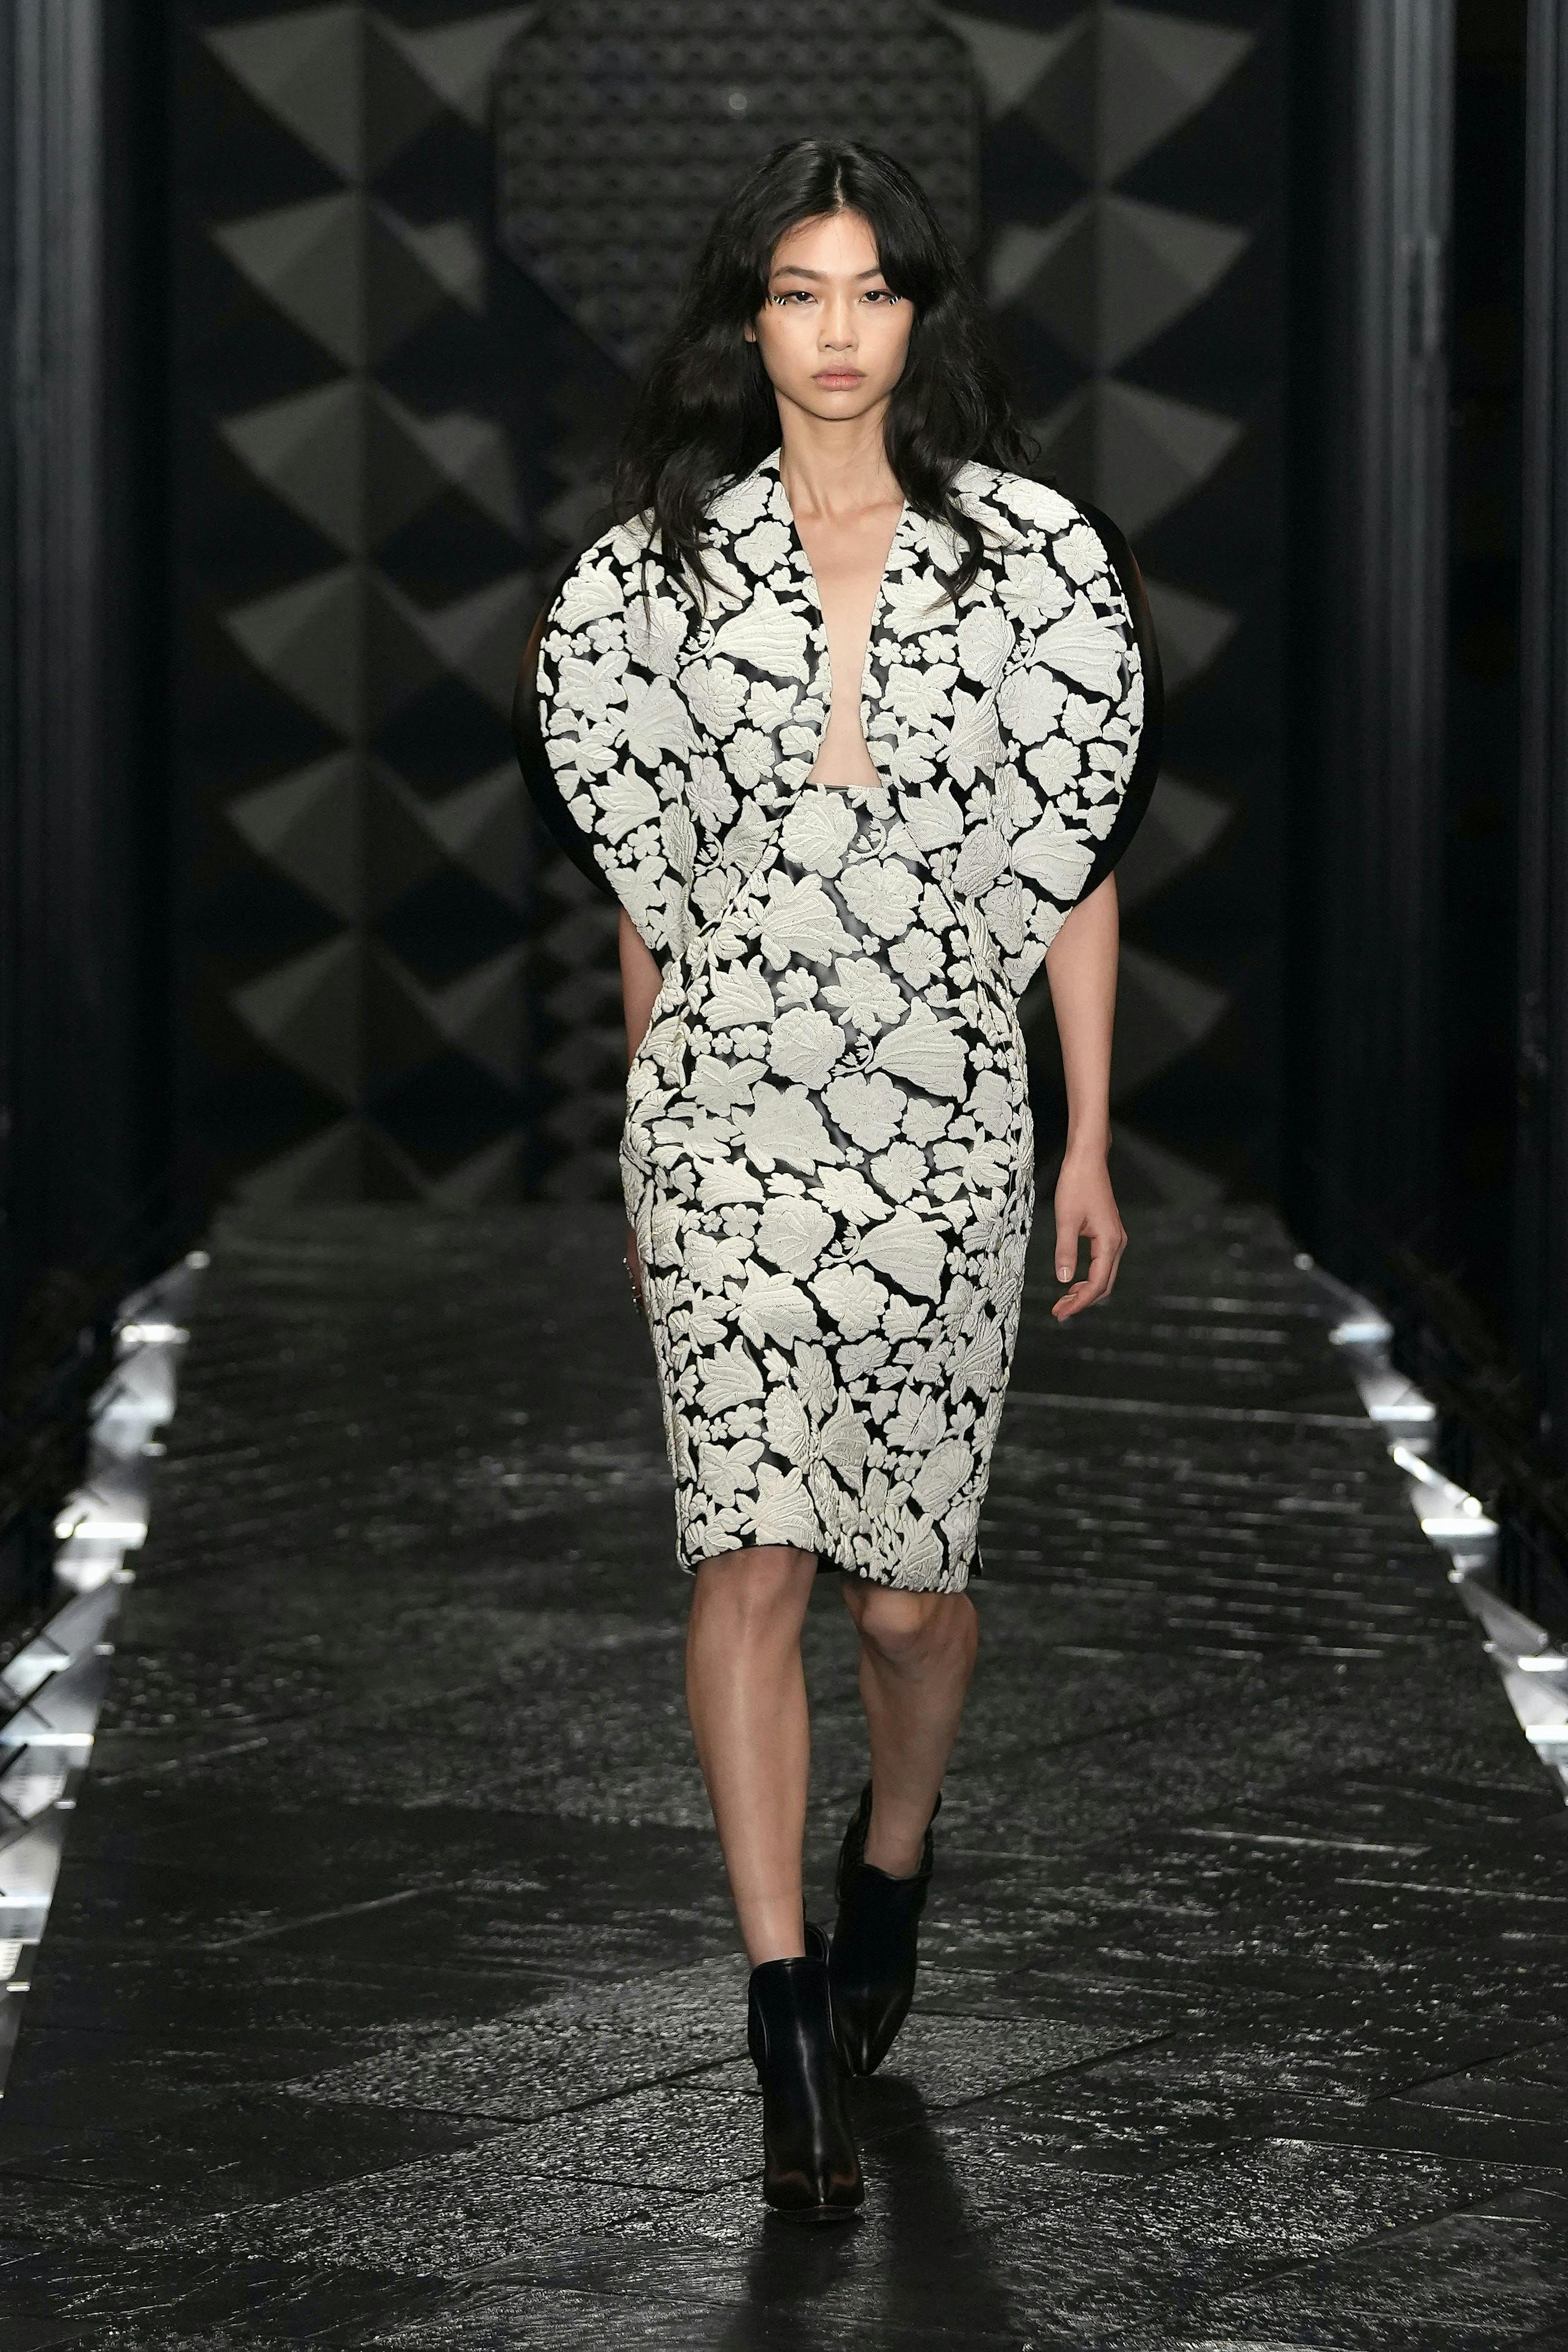 Model wears black and white flowered knee-length dress with black boots.